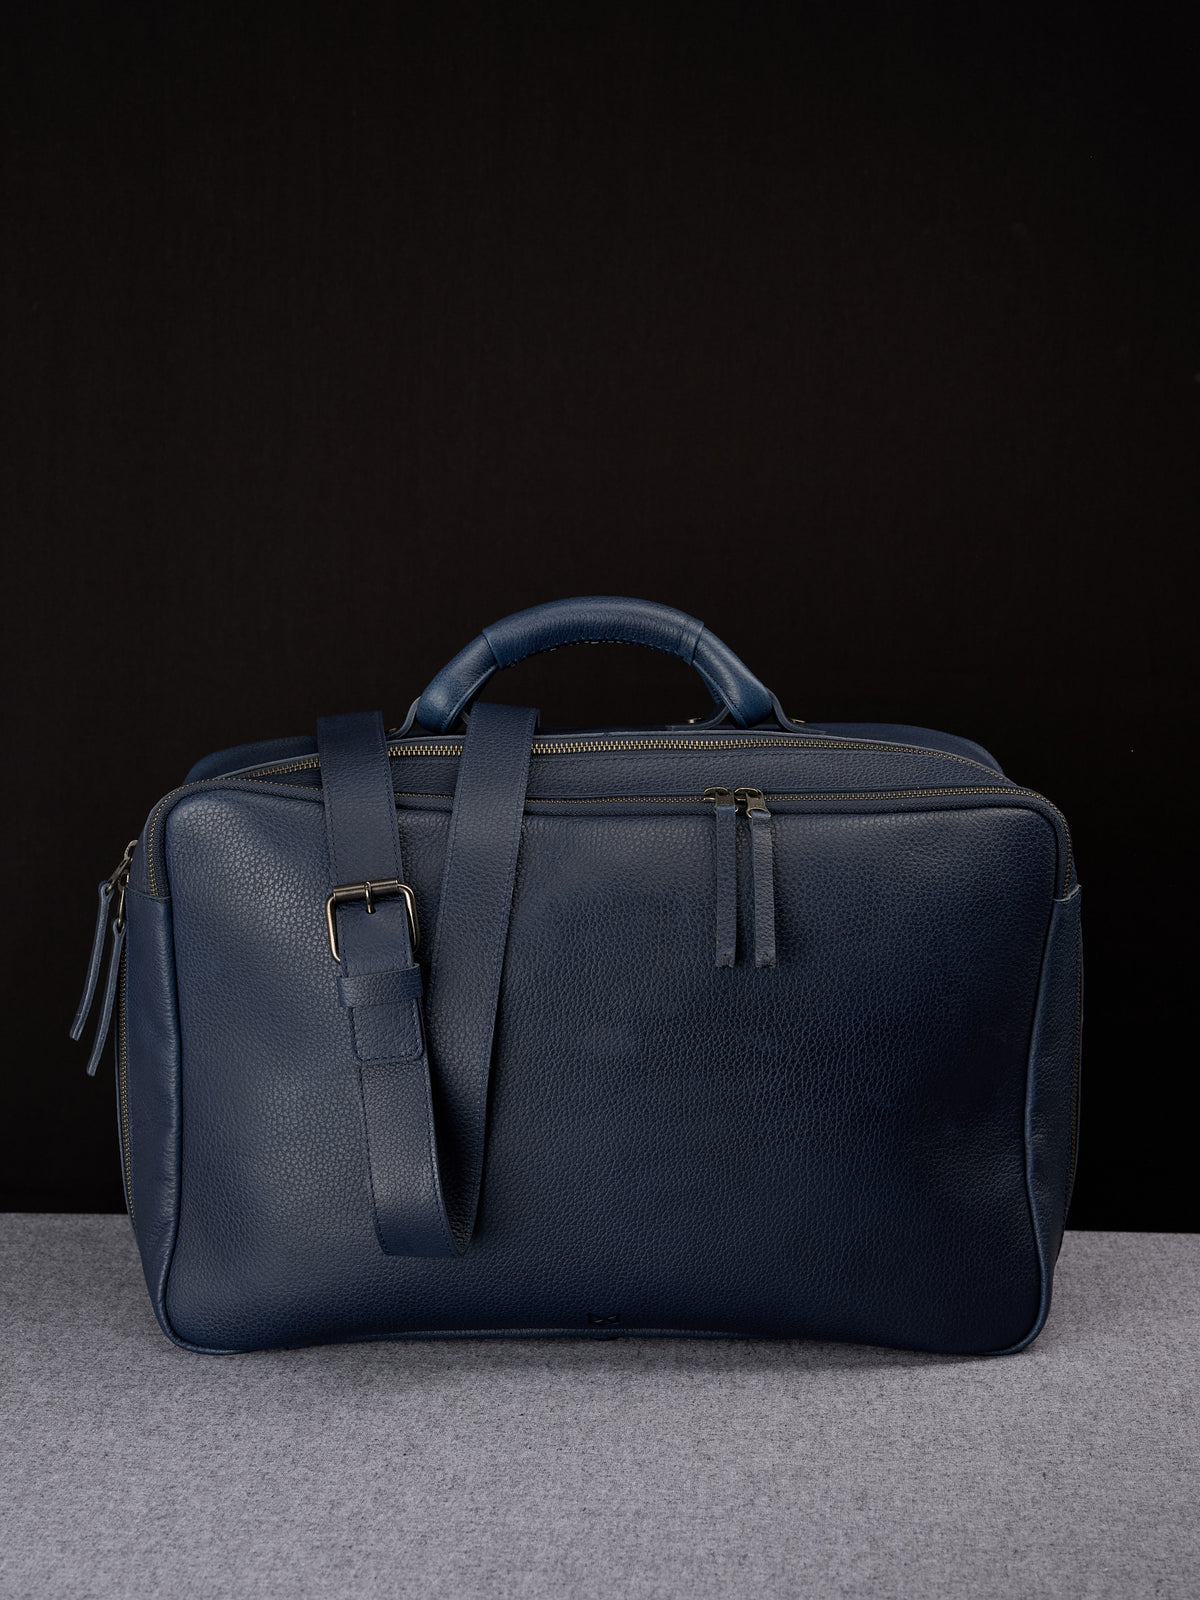 Leather duffle bag navy with shoulder strap by Capra